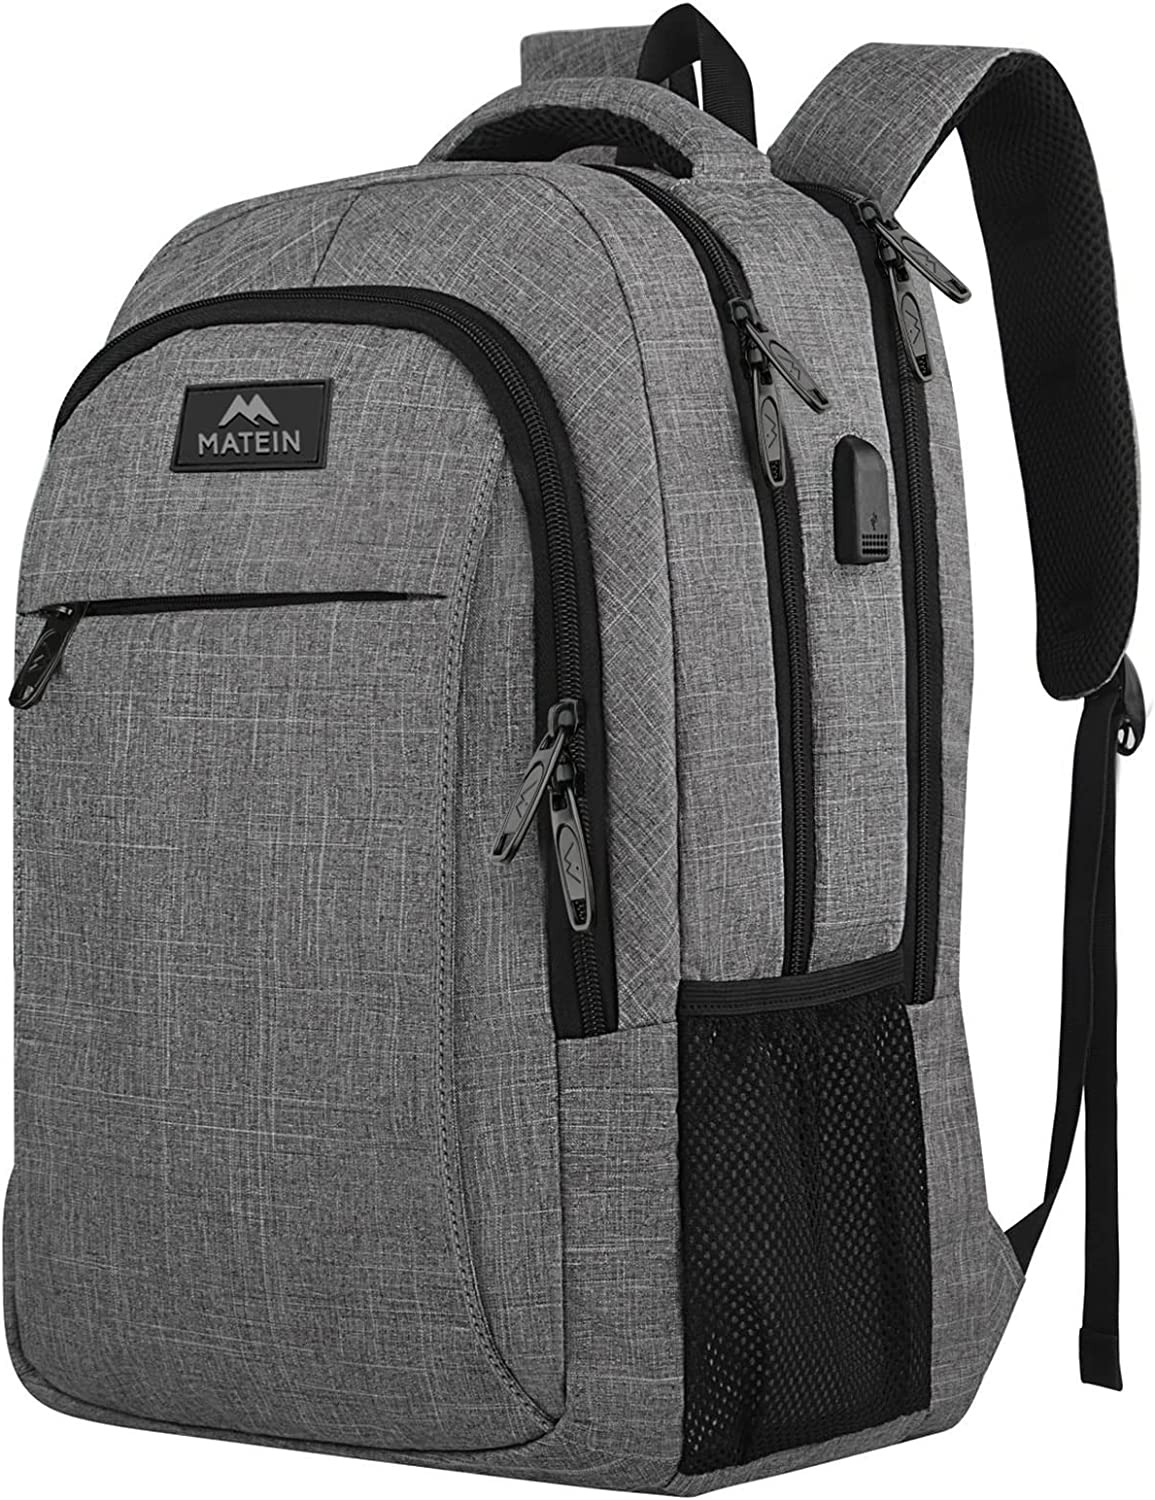 MATEIN Travel Laptop Backpack, Business Anti theft,fits 15.6 Inch Notebook, Grey